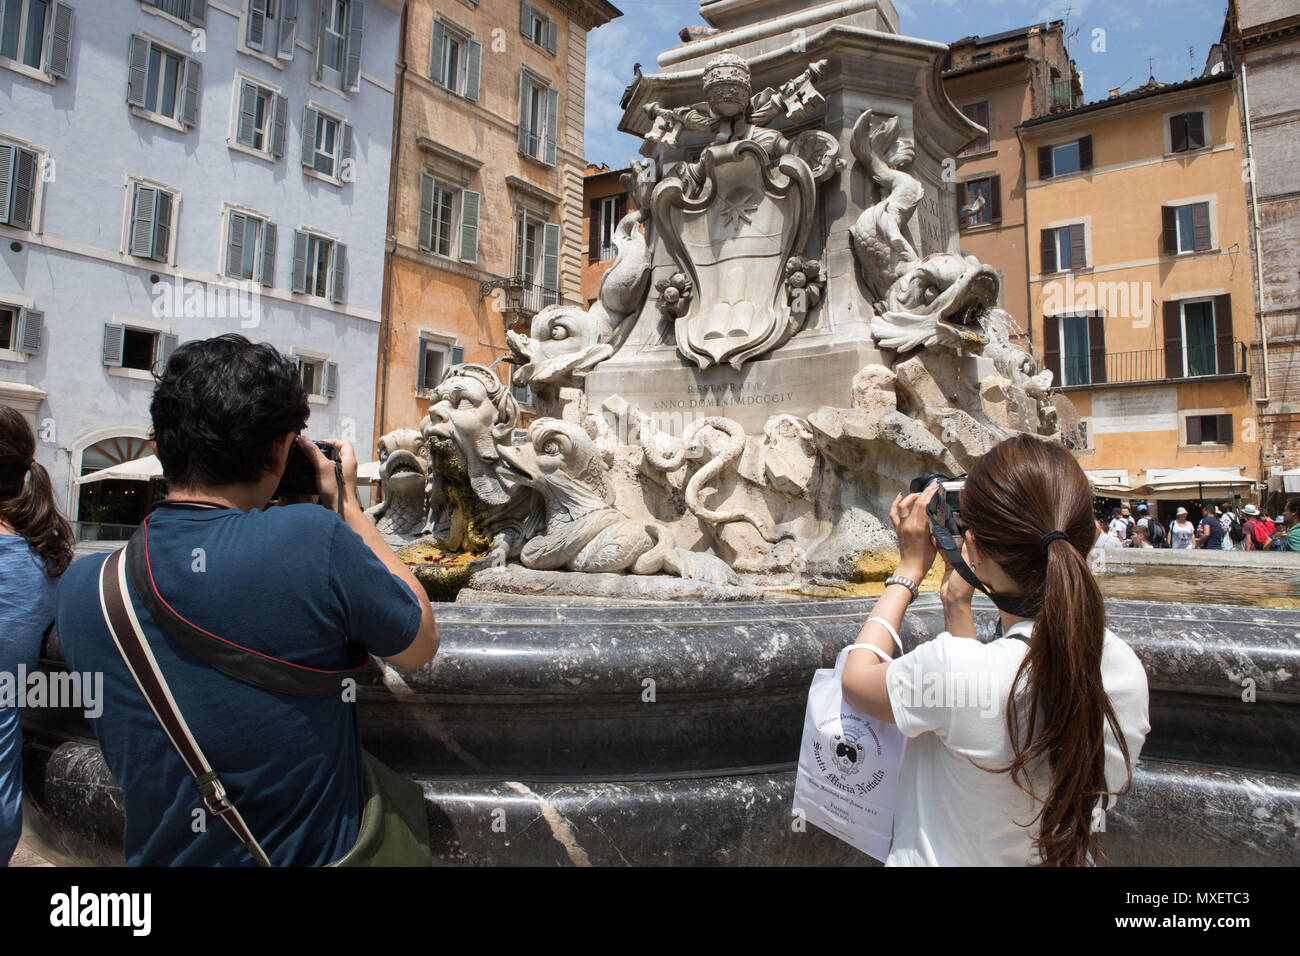 Rome Italy, tourist photographing a engraving on fountain in Piazza della Rotonda , Pantheon Piazza della Rotonda Stock Photo